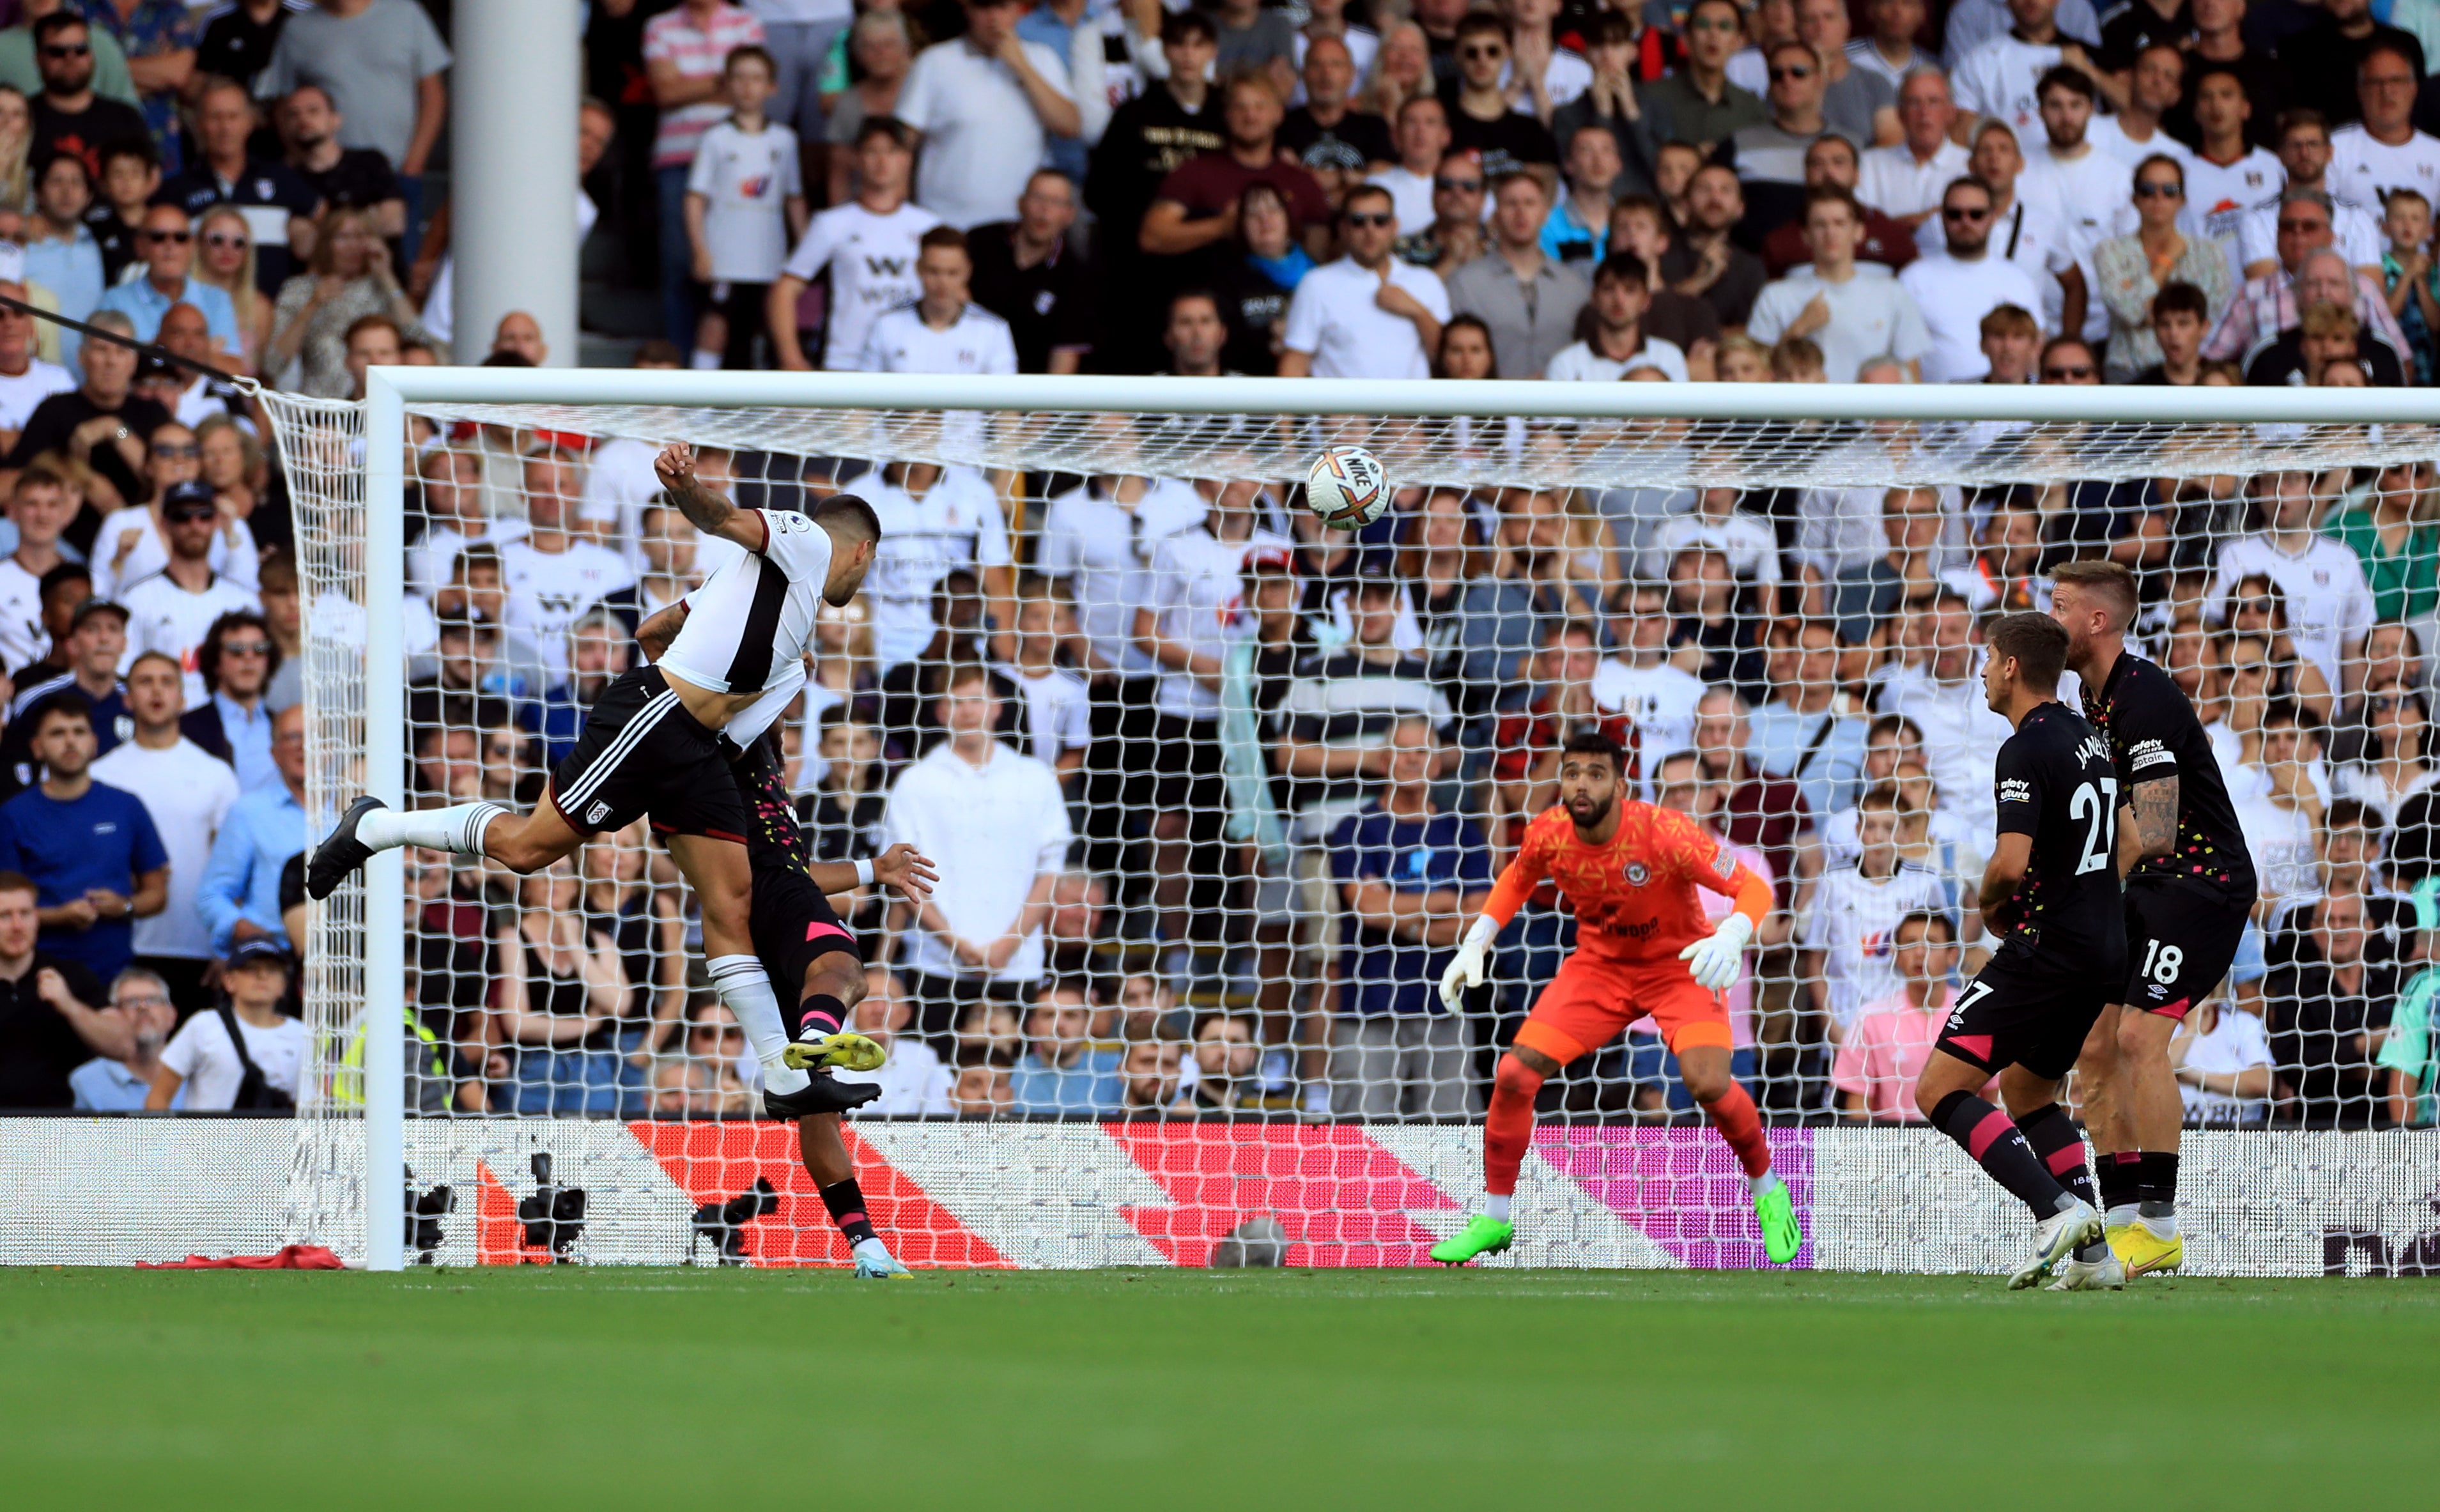 Mitrovic guides his header past Brentford goalkeeper David Raya to claim all three points for Fulham